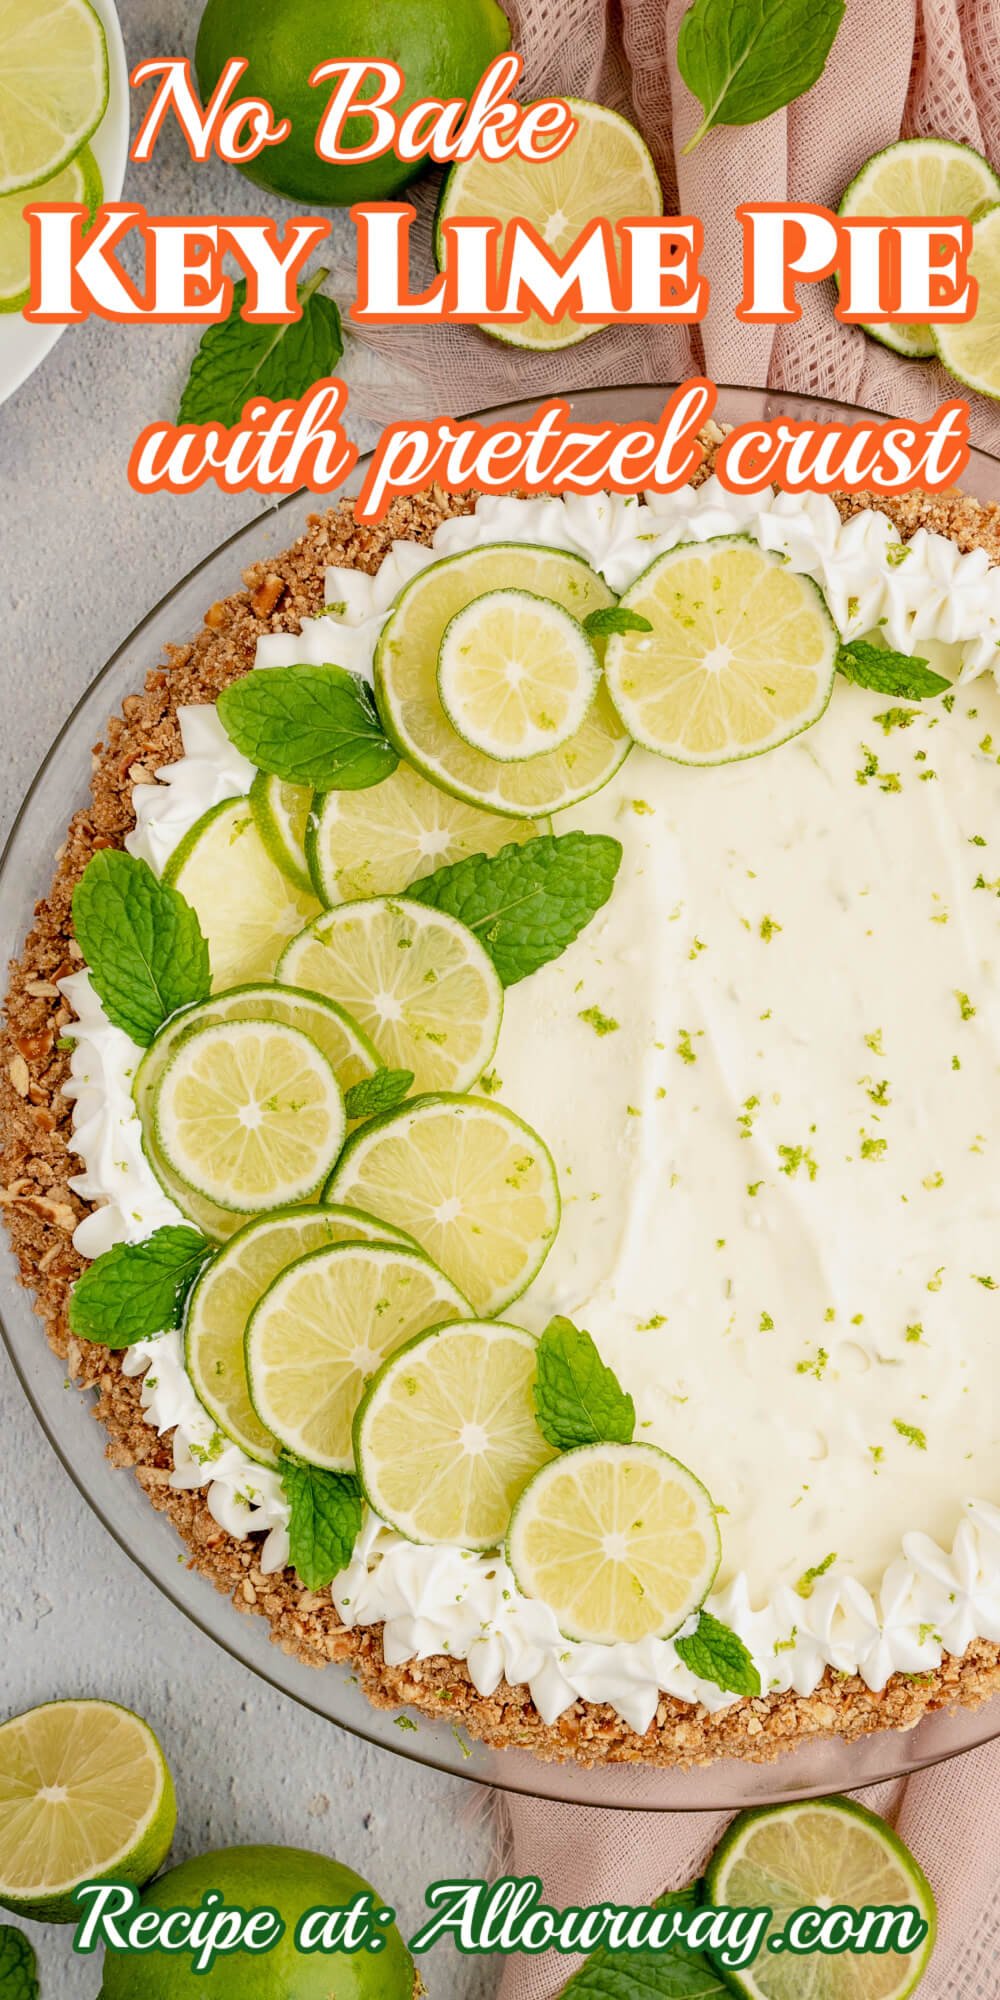 This creamy and zesty No Bake Key Lime Pie bursts with fresh citrus flavor with a crushed and buttery pretzel crust. This refrigerated dessert is perfect for summertime celebrations and holidays! A dessert that screams sophistication but is very simple to make.